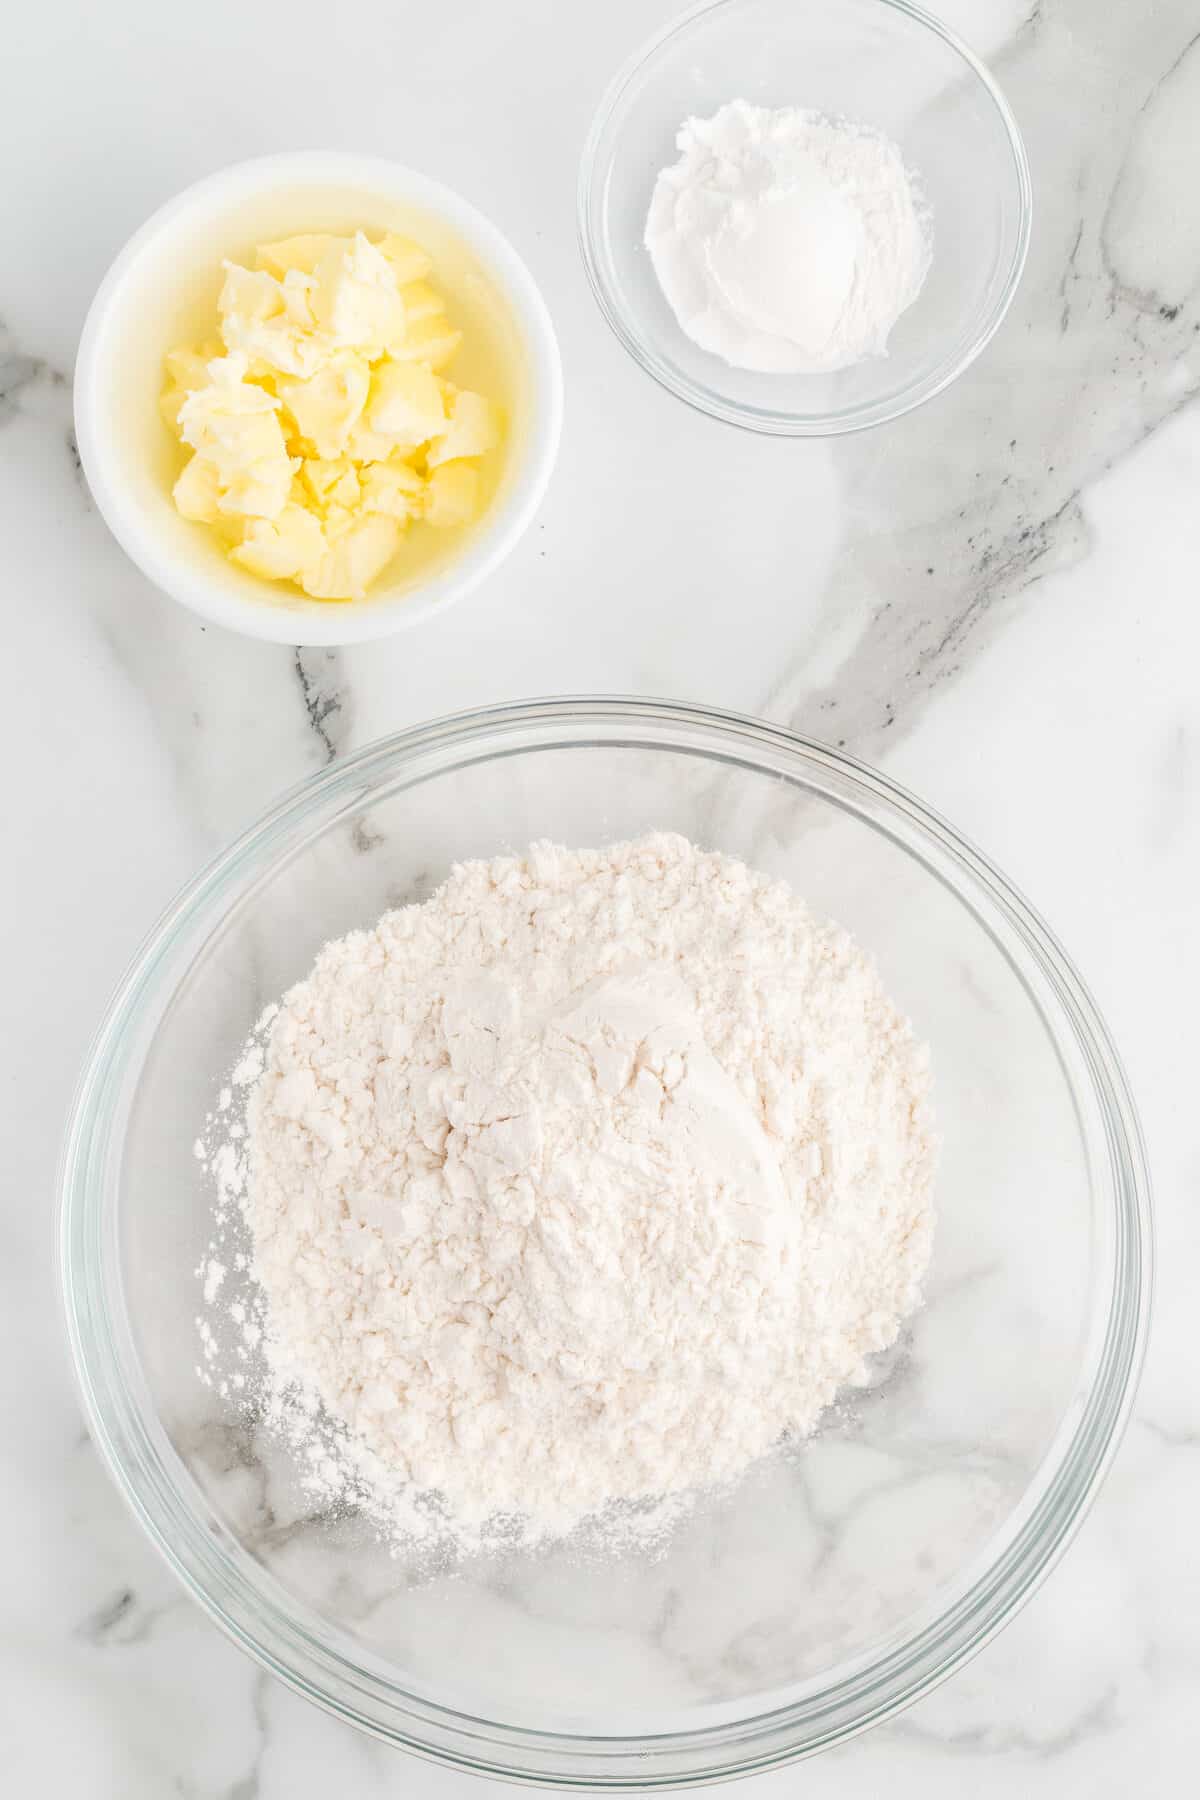 dry ingredients and butter in glass bowls.